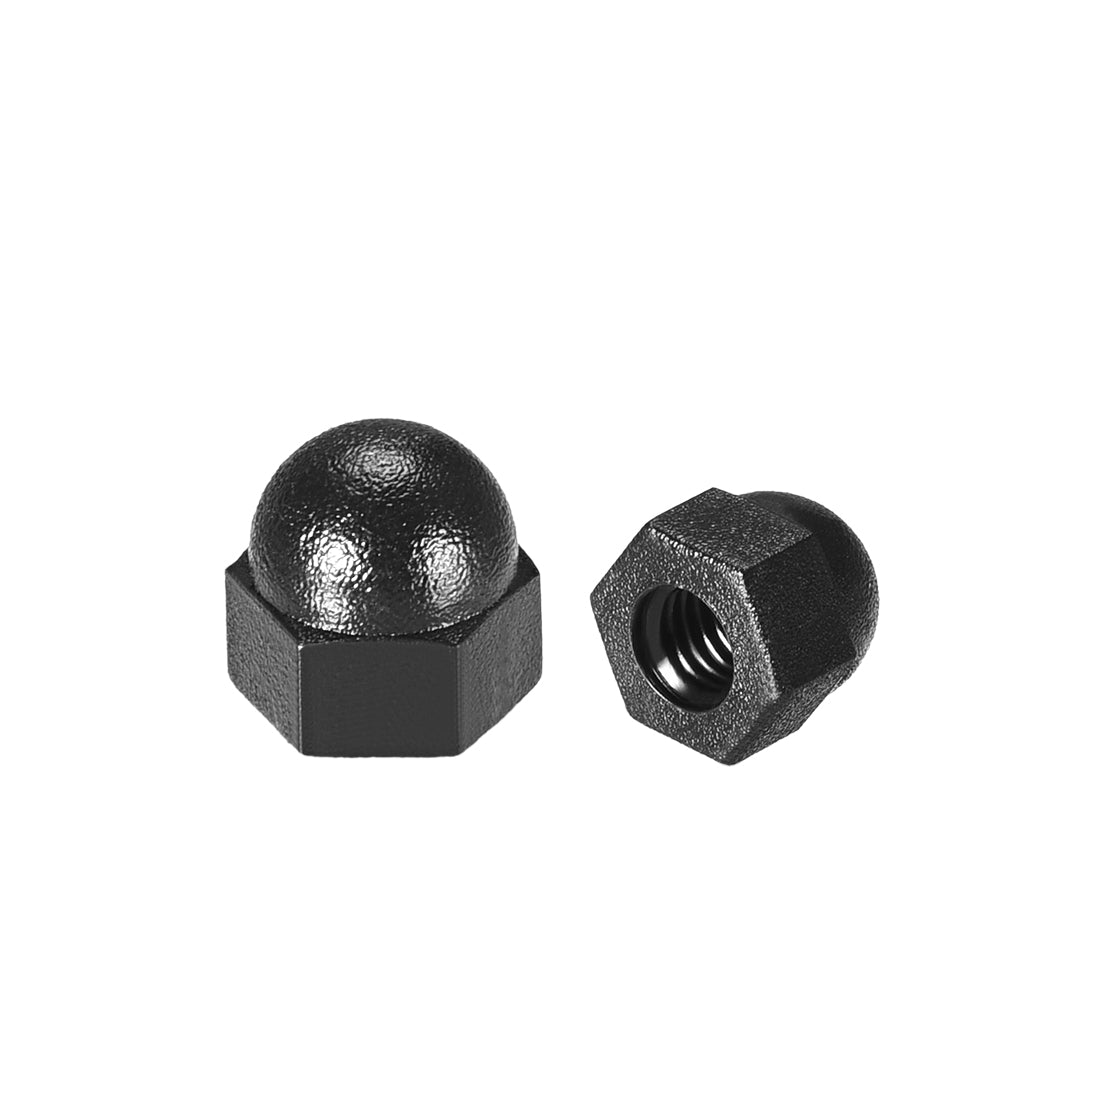 Uxcell Uxcell M5 Cap Nut, Hex Acorn Dome Head Nuts for Screws Bolts Nylon Black 50 Pcs